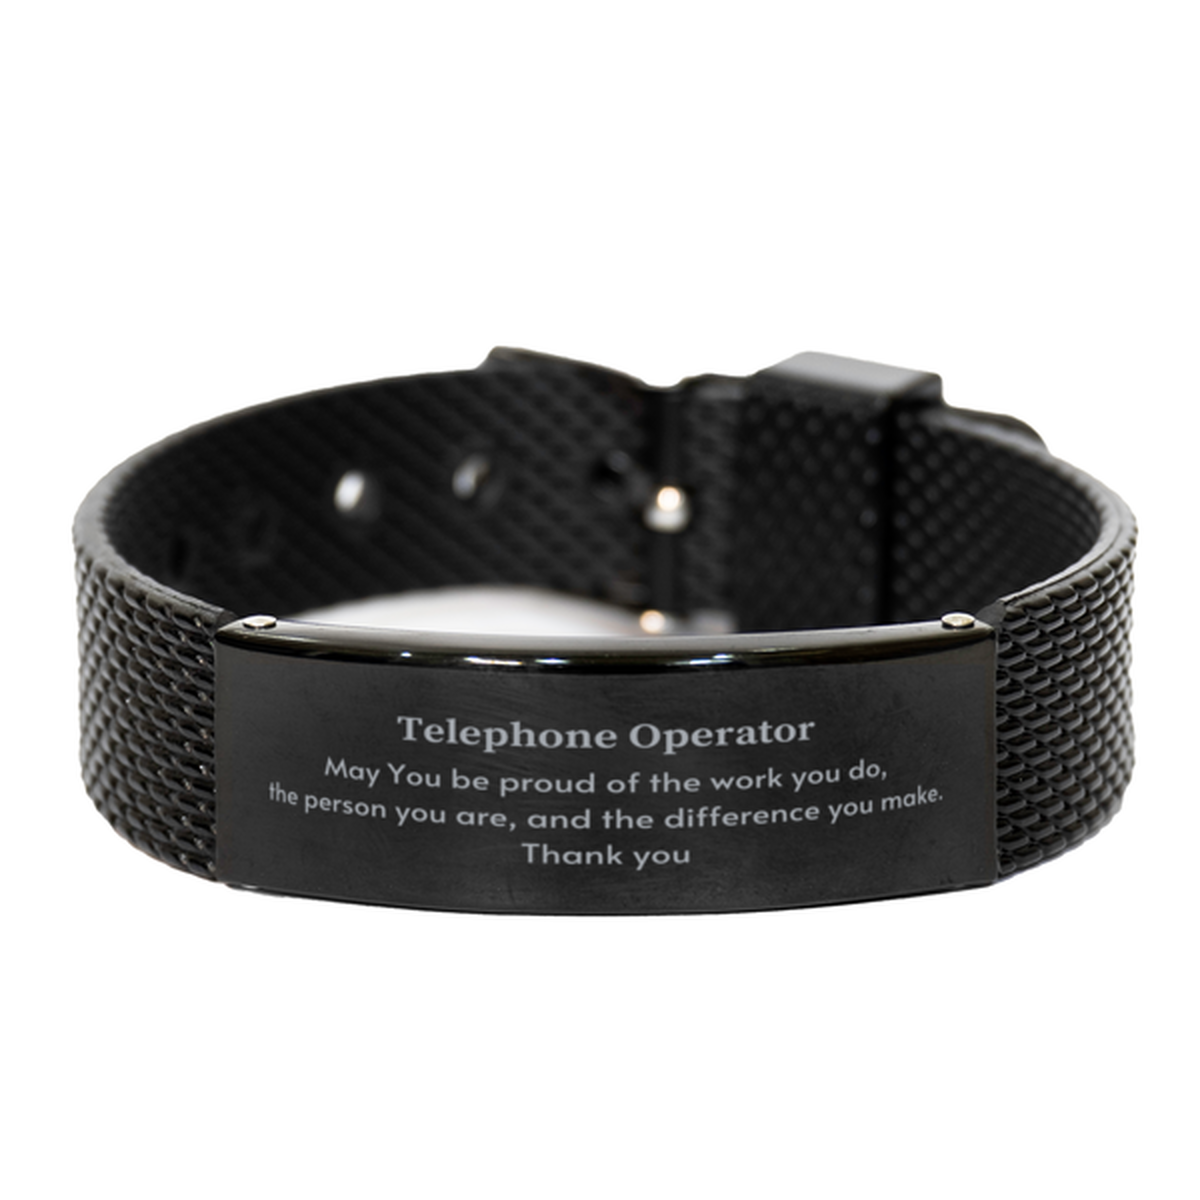 Heartwarming Black Shark Mesh Bracelet Retirement Coworkers Gifts for Telephone Operator, Telephone Operator May You be proud of the work you do, the person you are Gifts for Boss Men Women Friends